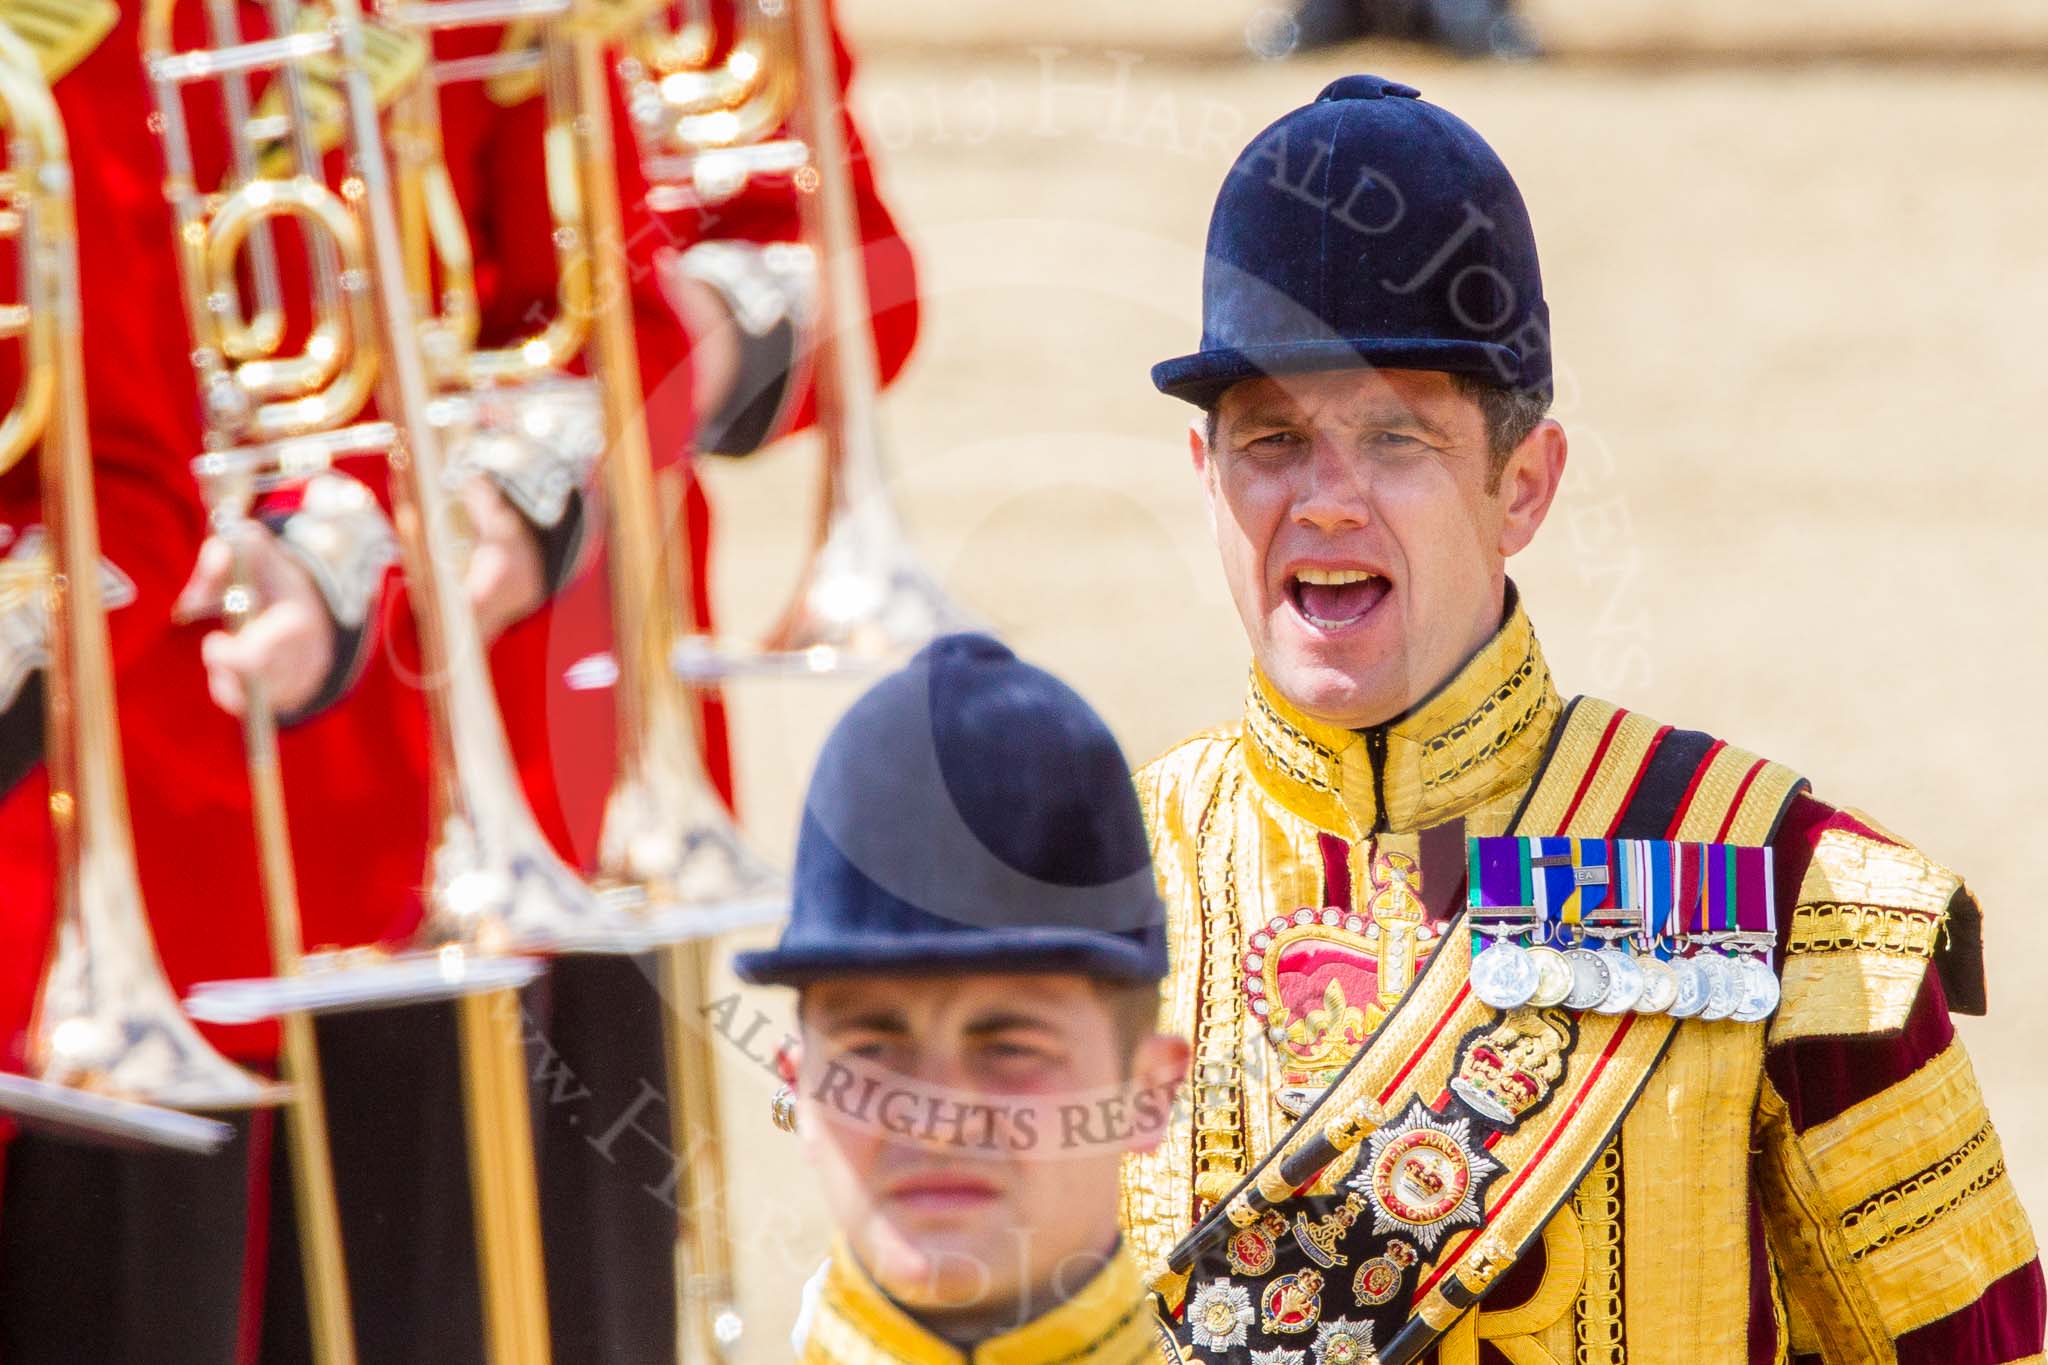 Trooping the Colour 2013: Drum Major D P Thomas, Grenadier Guards, and Senior Drum Major M J Betts, Grenadier Guards, commanding..
Horse Guards Parade, Westminster,
London SW1,

United Kingdom,
on 15 June 2013 at 11:52, image #645